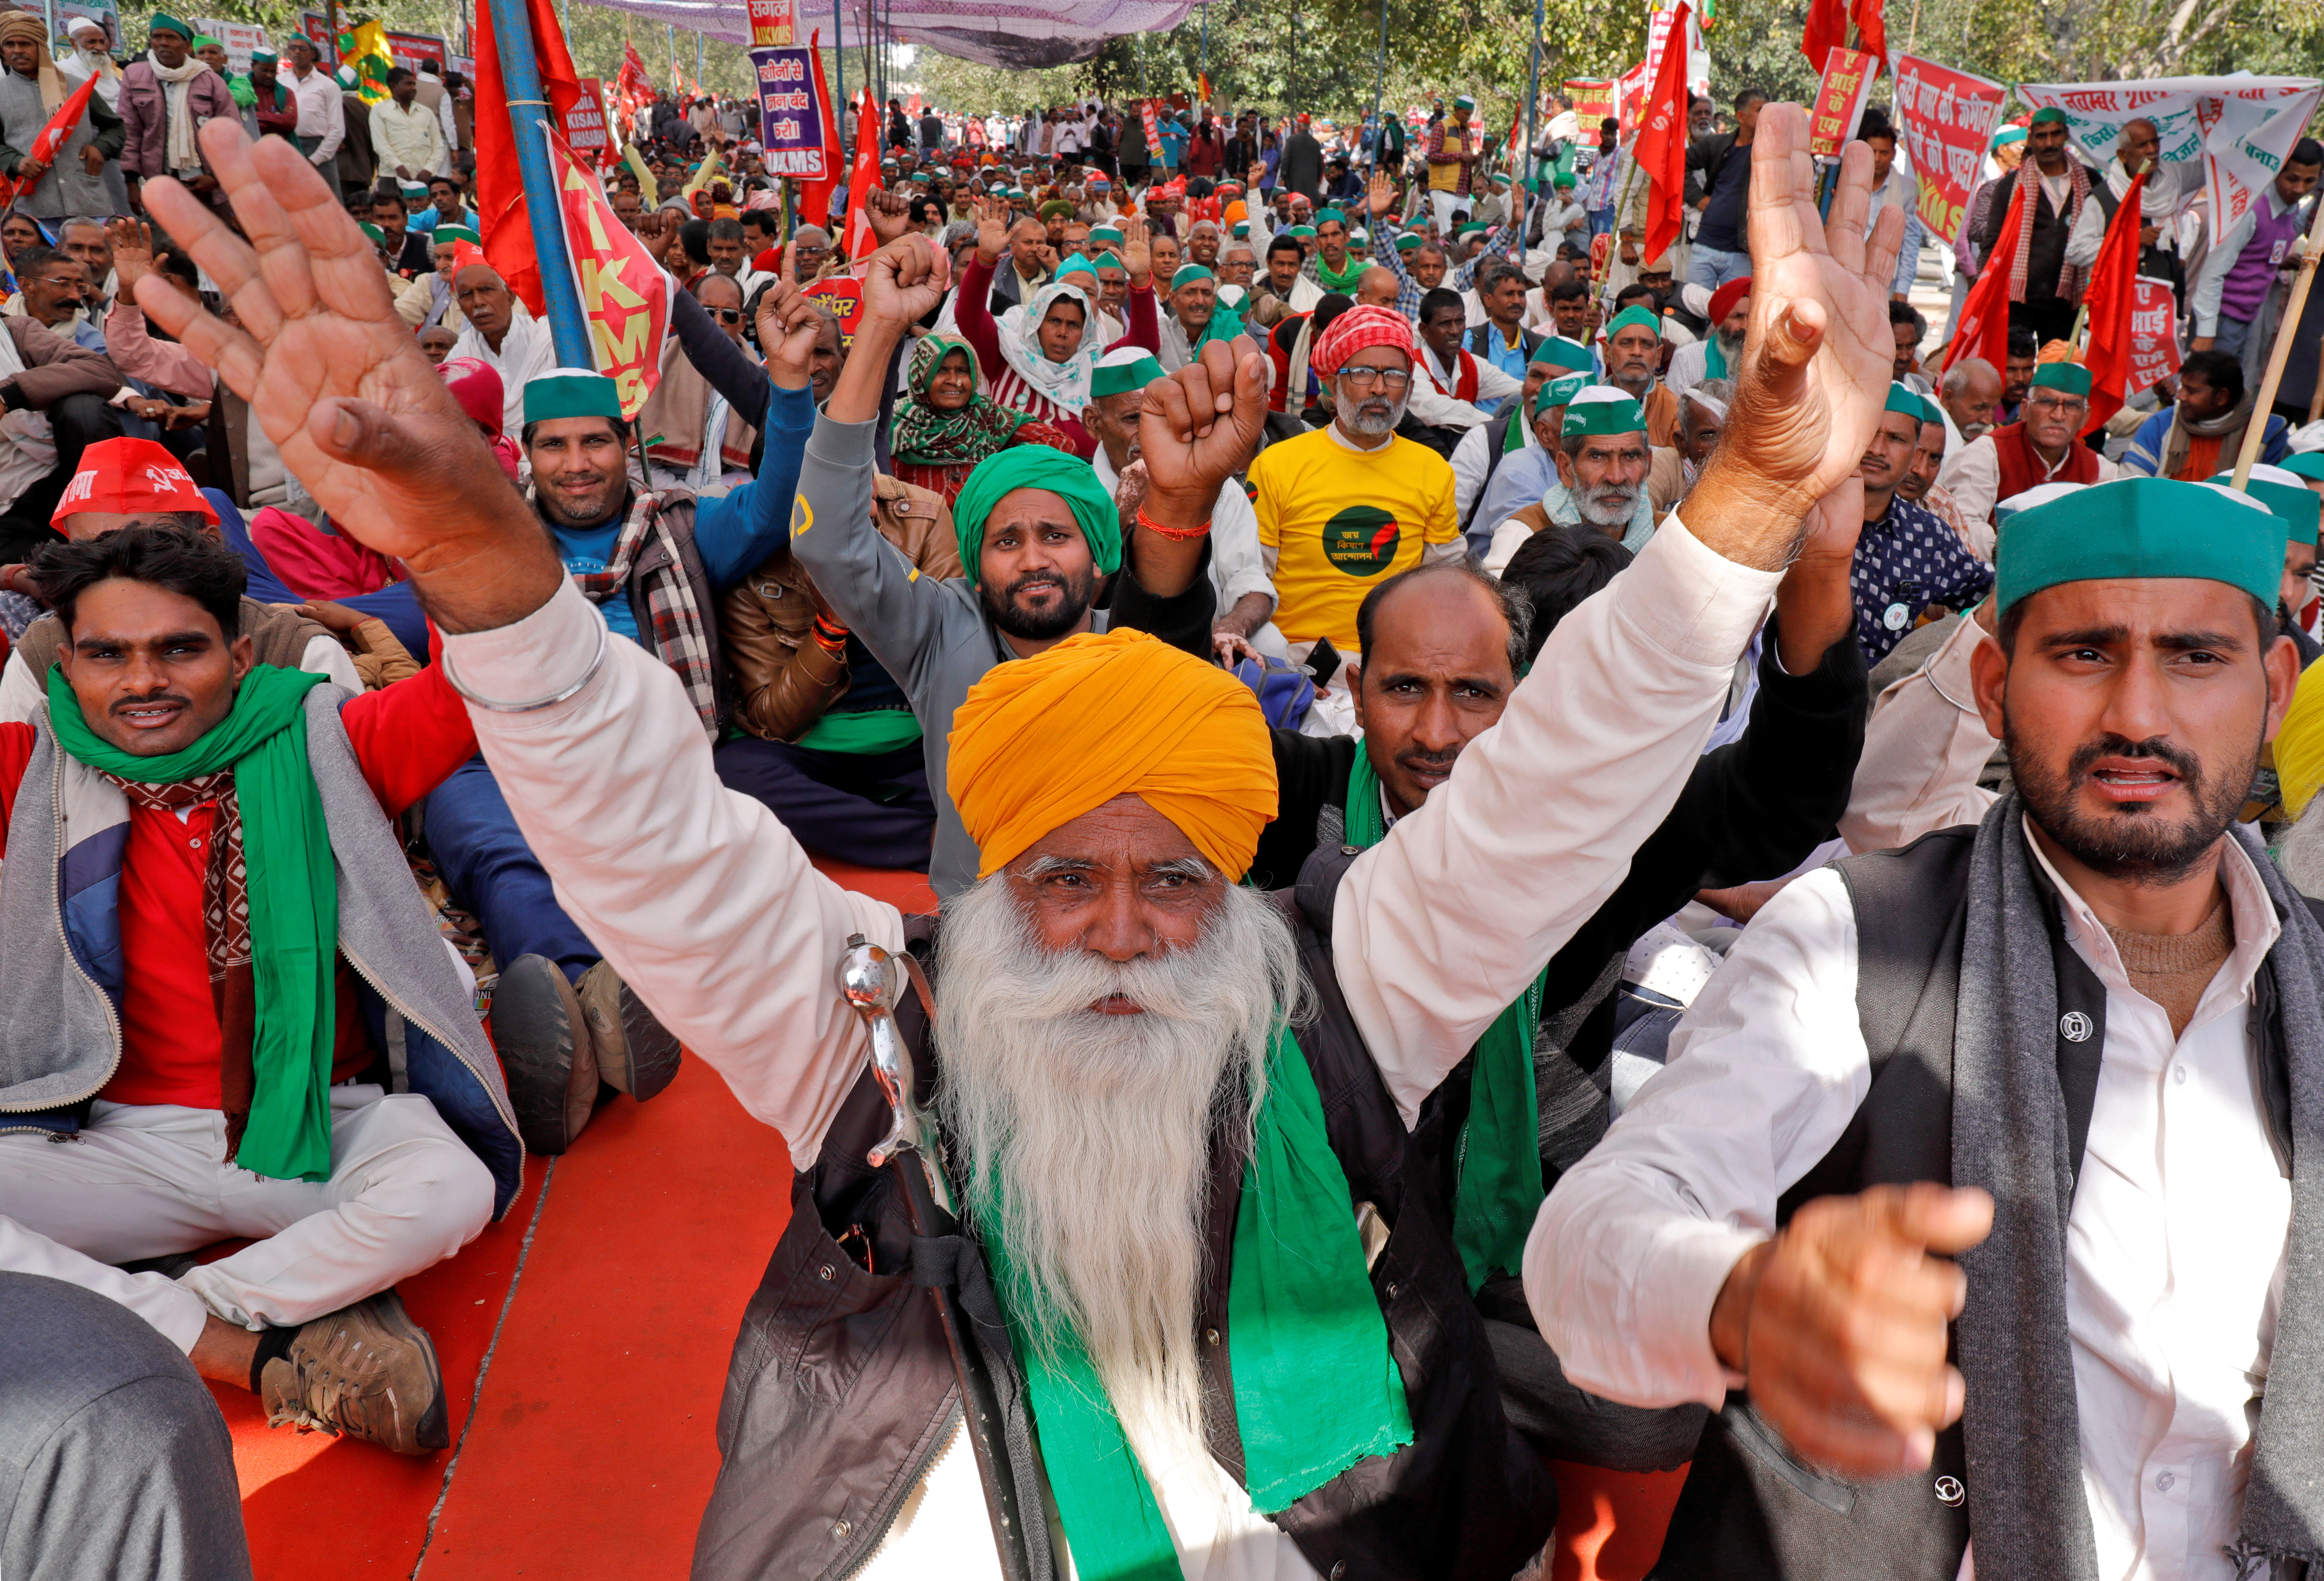 Farmers shout slogans during a mass rally to demand minimum support prices be extended to all produce, in Lucknow